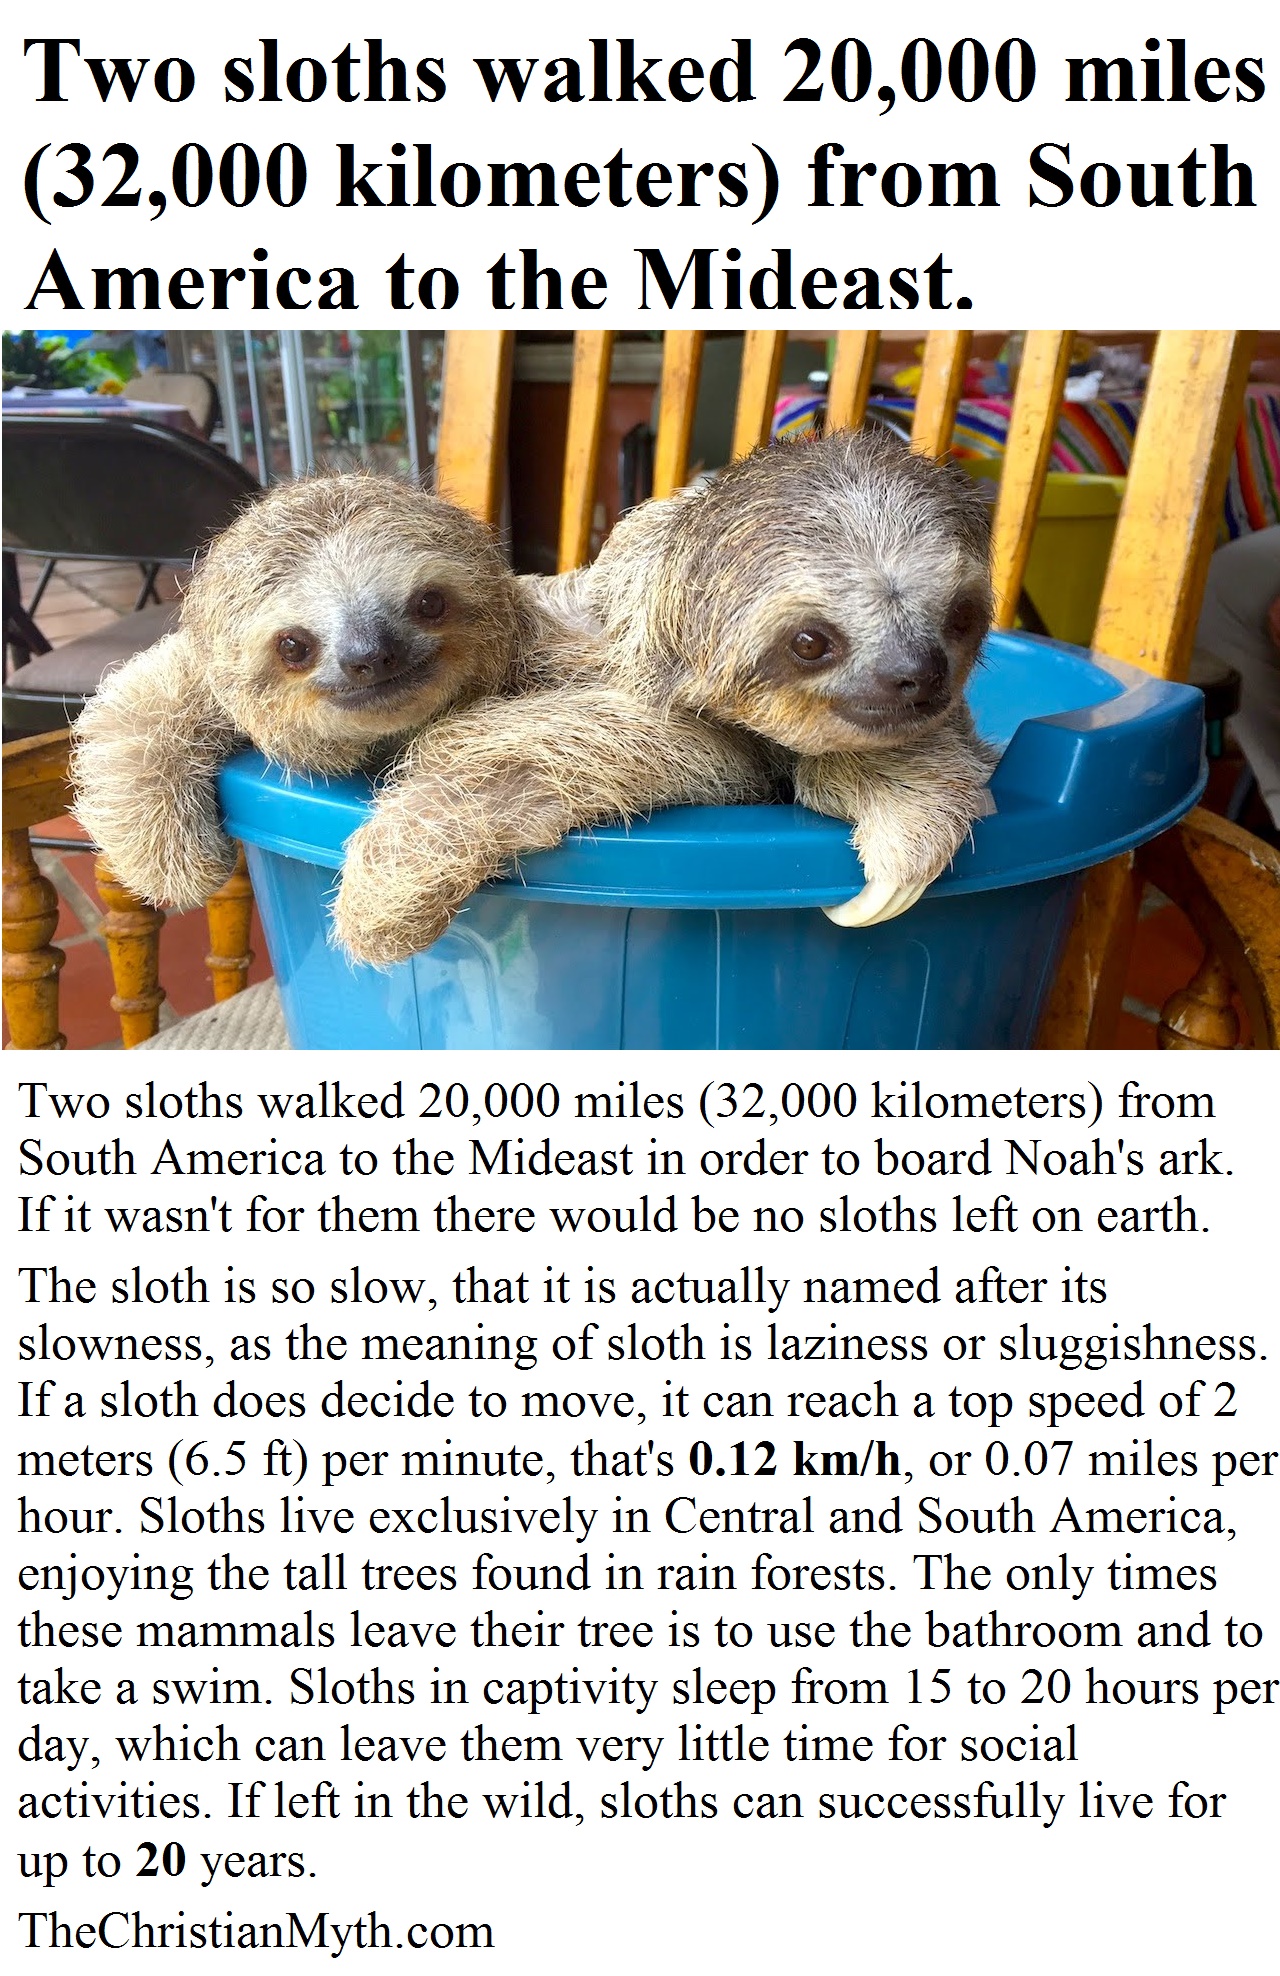 Two sloths walked 20,000 miles (32,000 kilometers) from South America to the Mideast. 